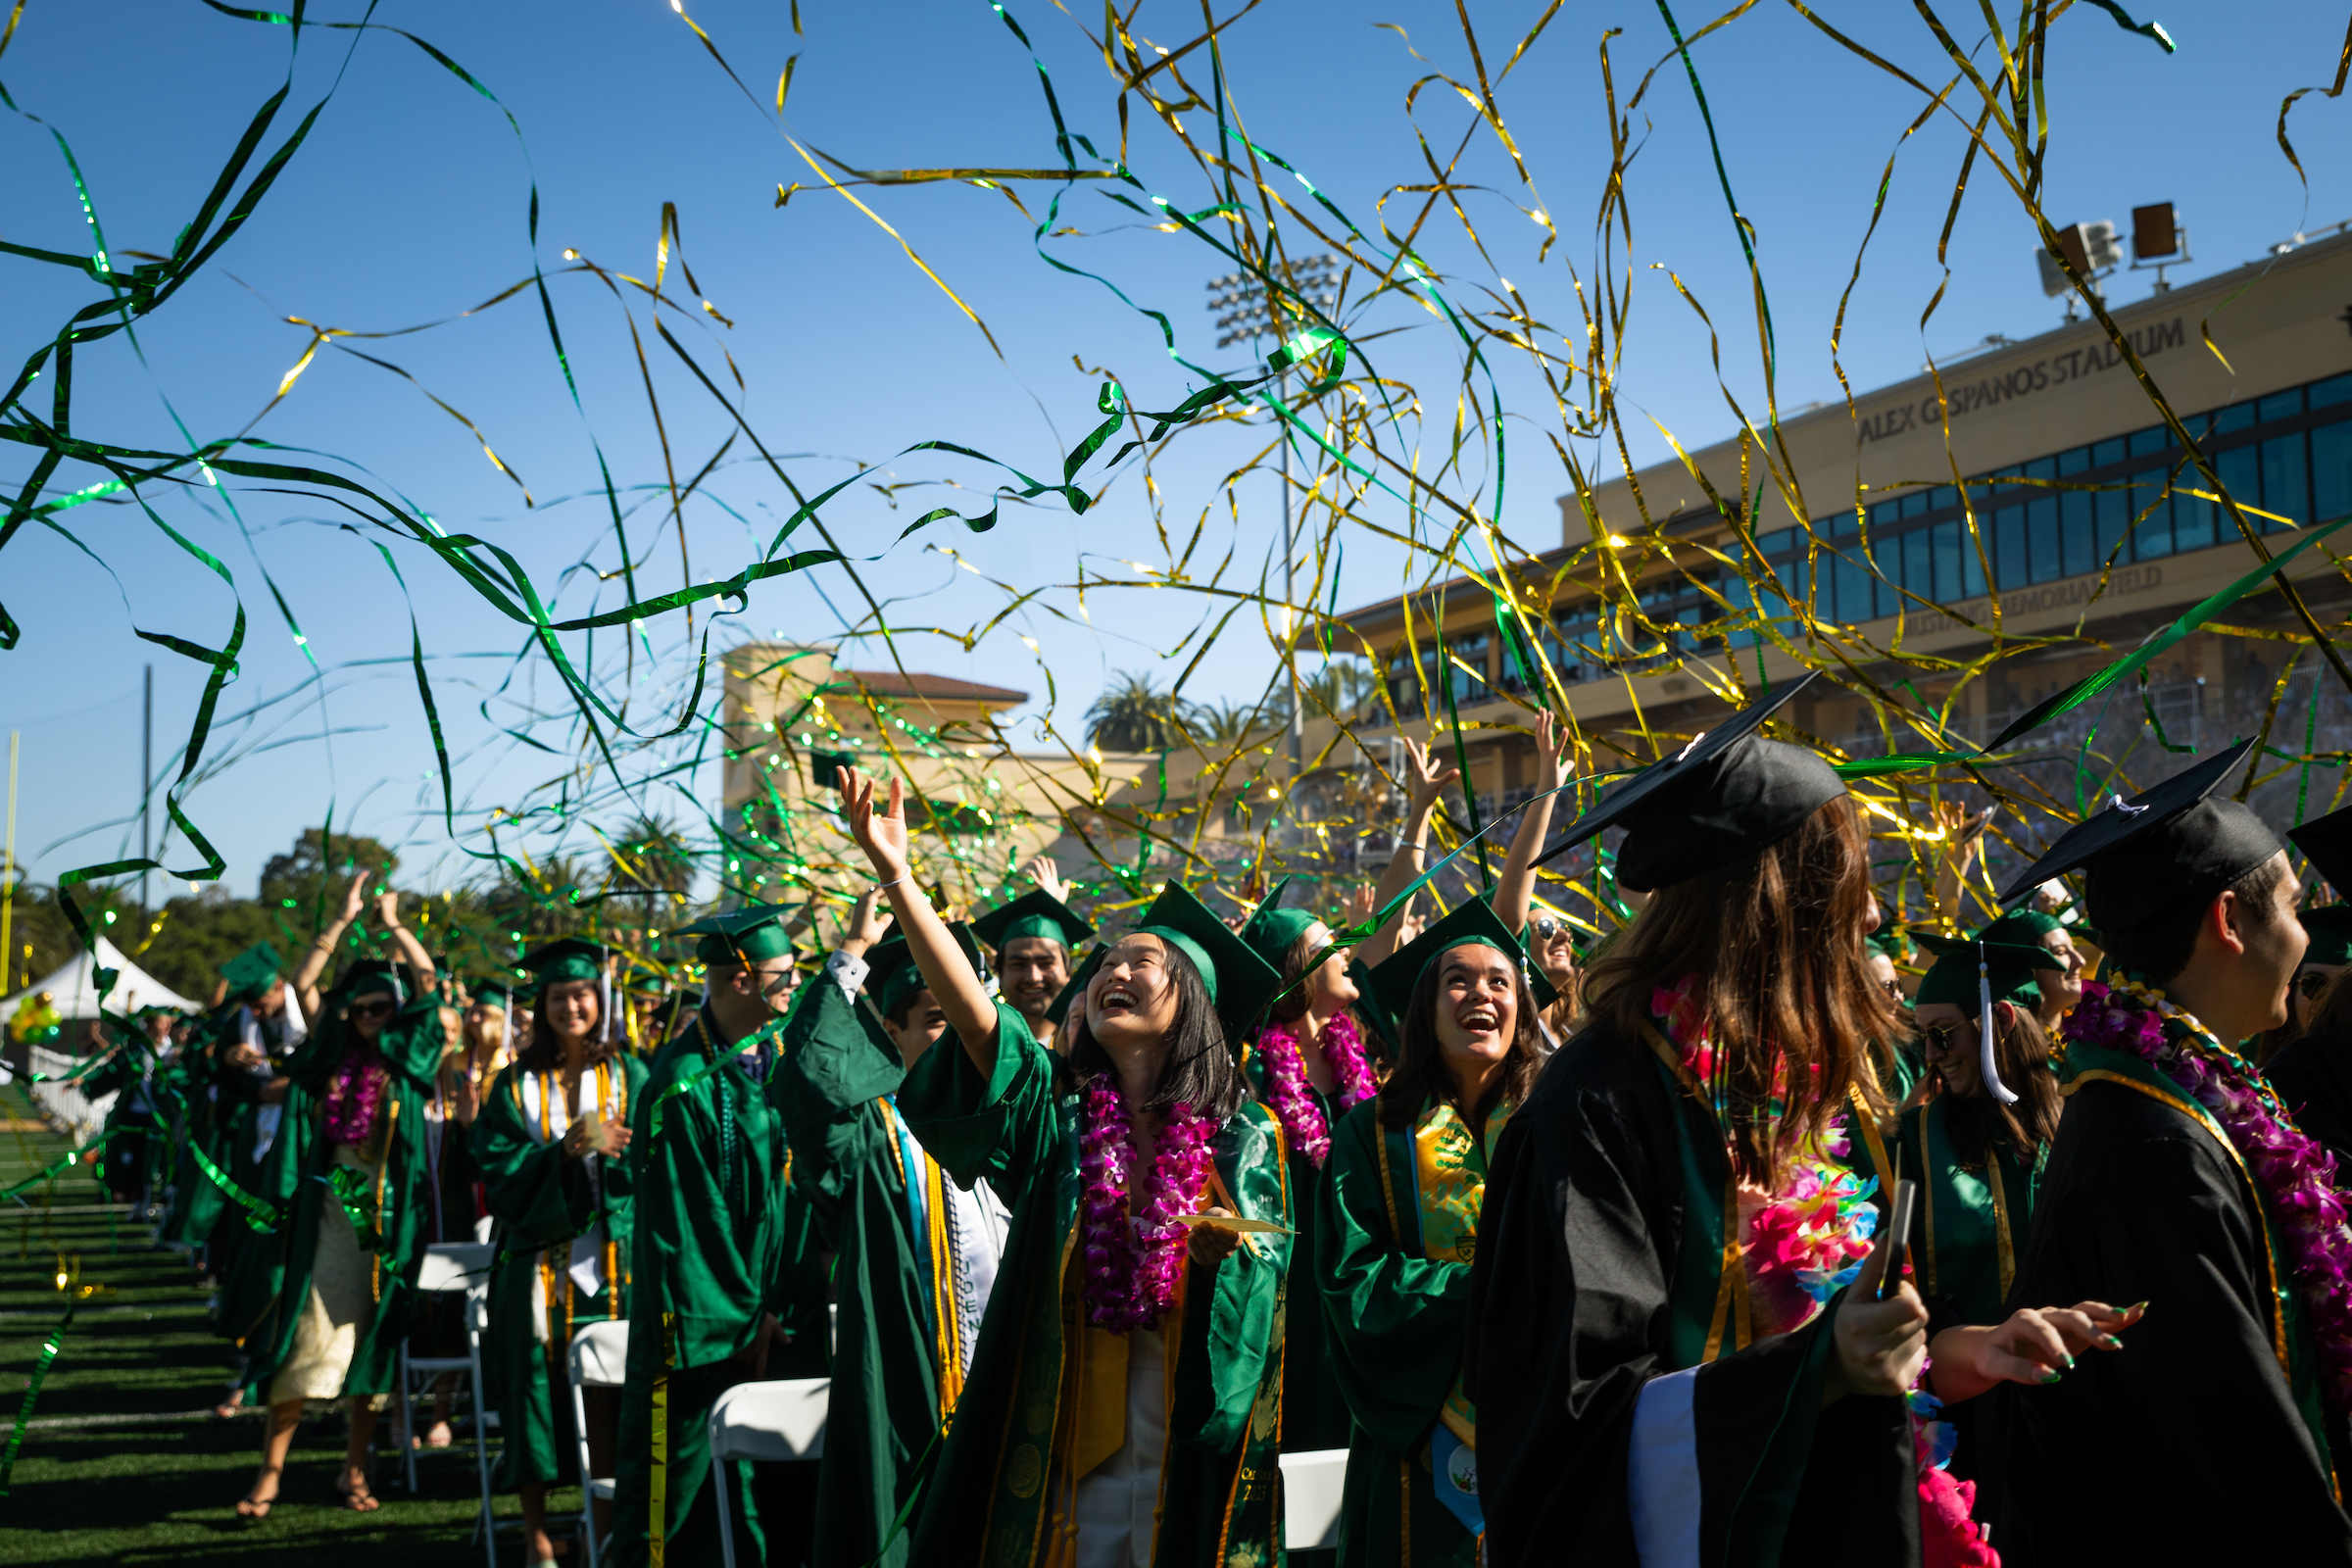 Students in green graduation robes stand at the commencement ceremony and look up smiling while green and gold streamers fly around.